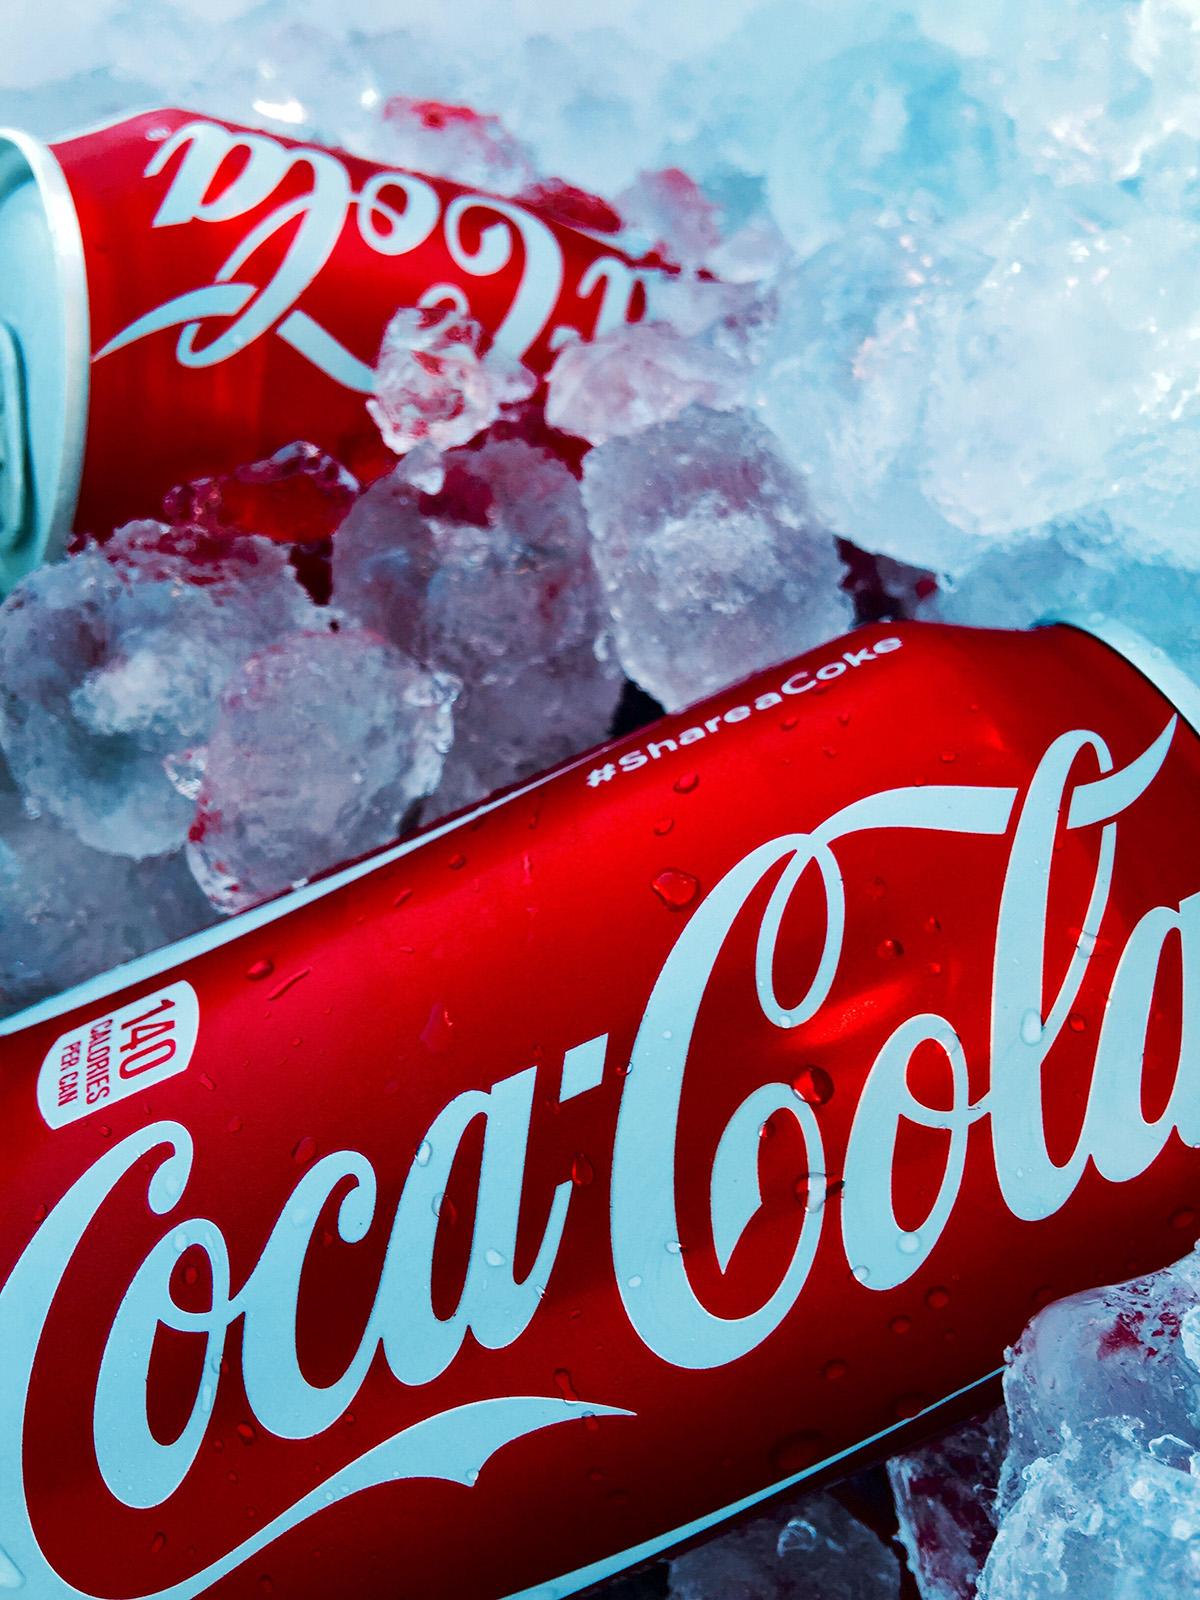 Moments Of Happiness From Our Readers: The Coca Cola Company